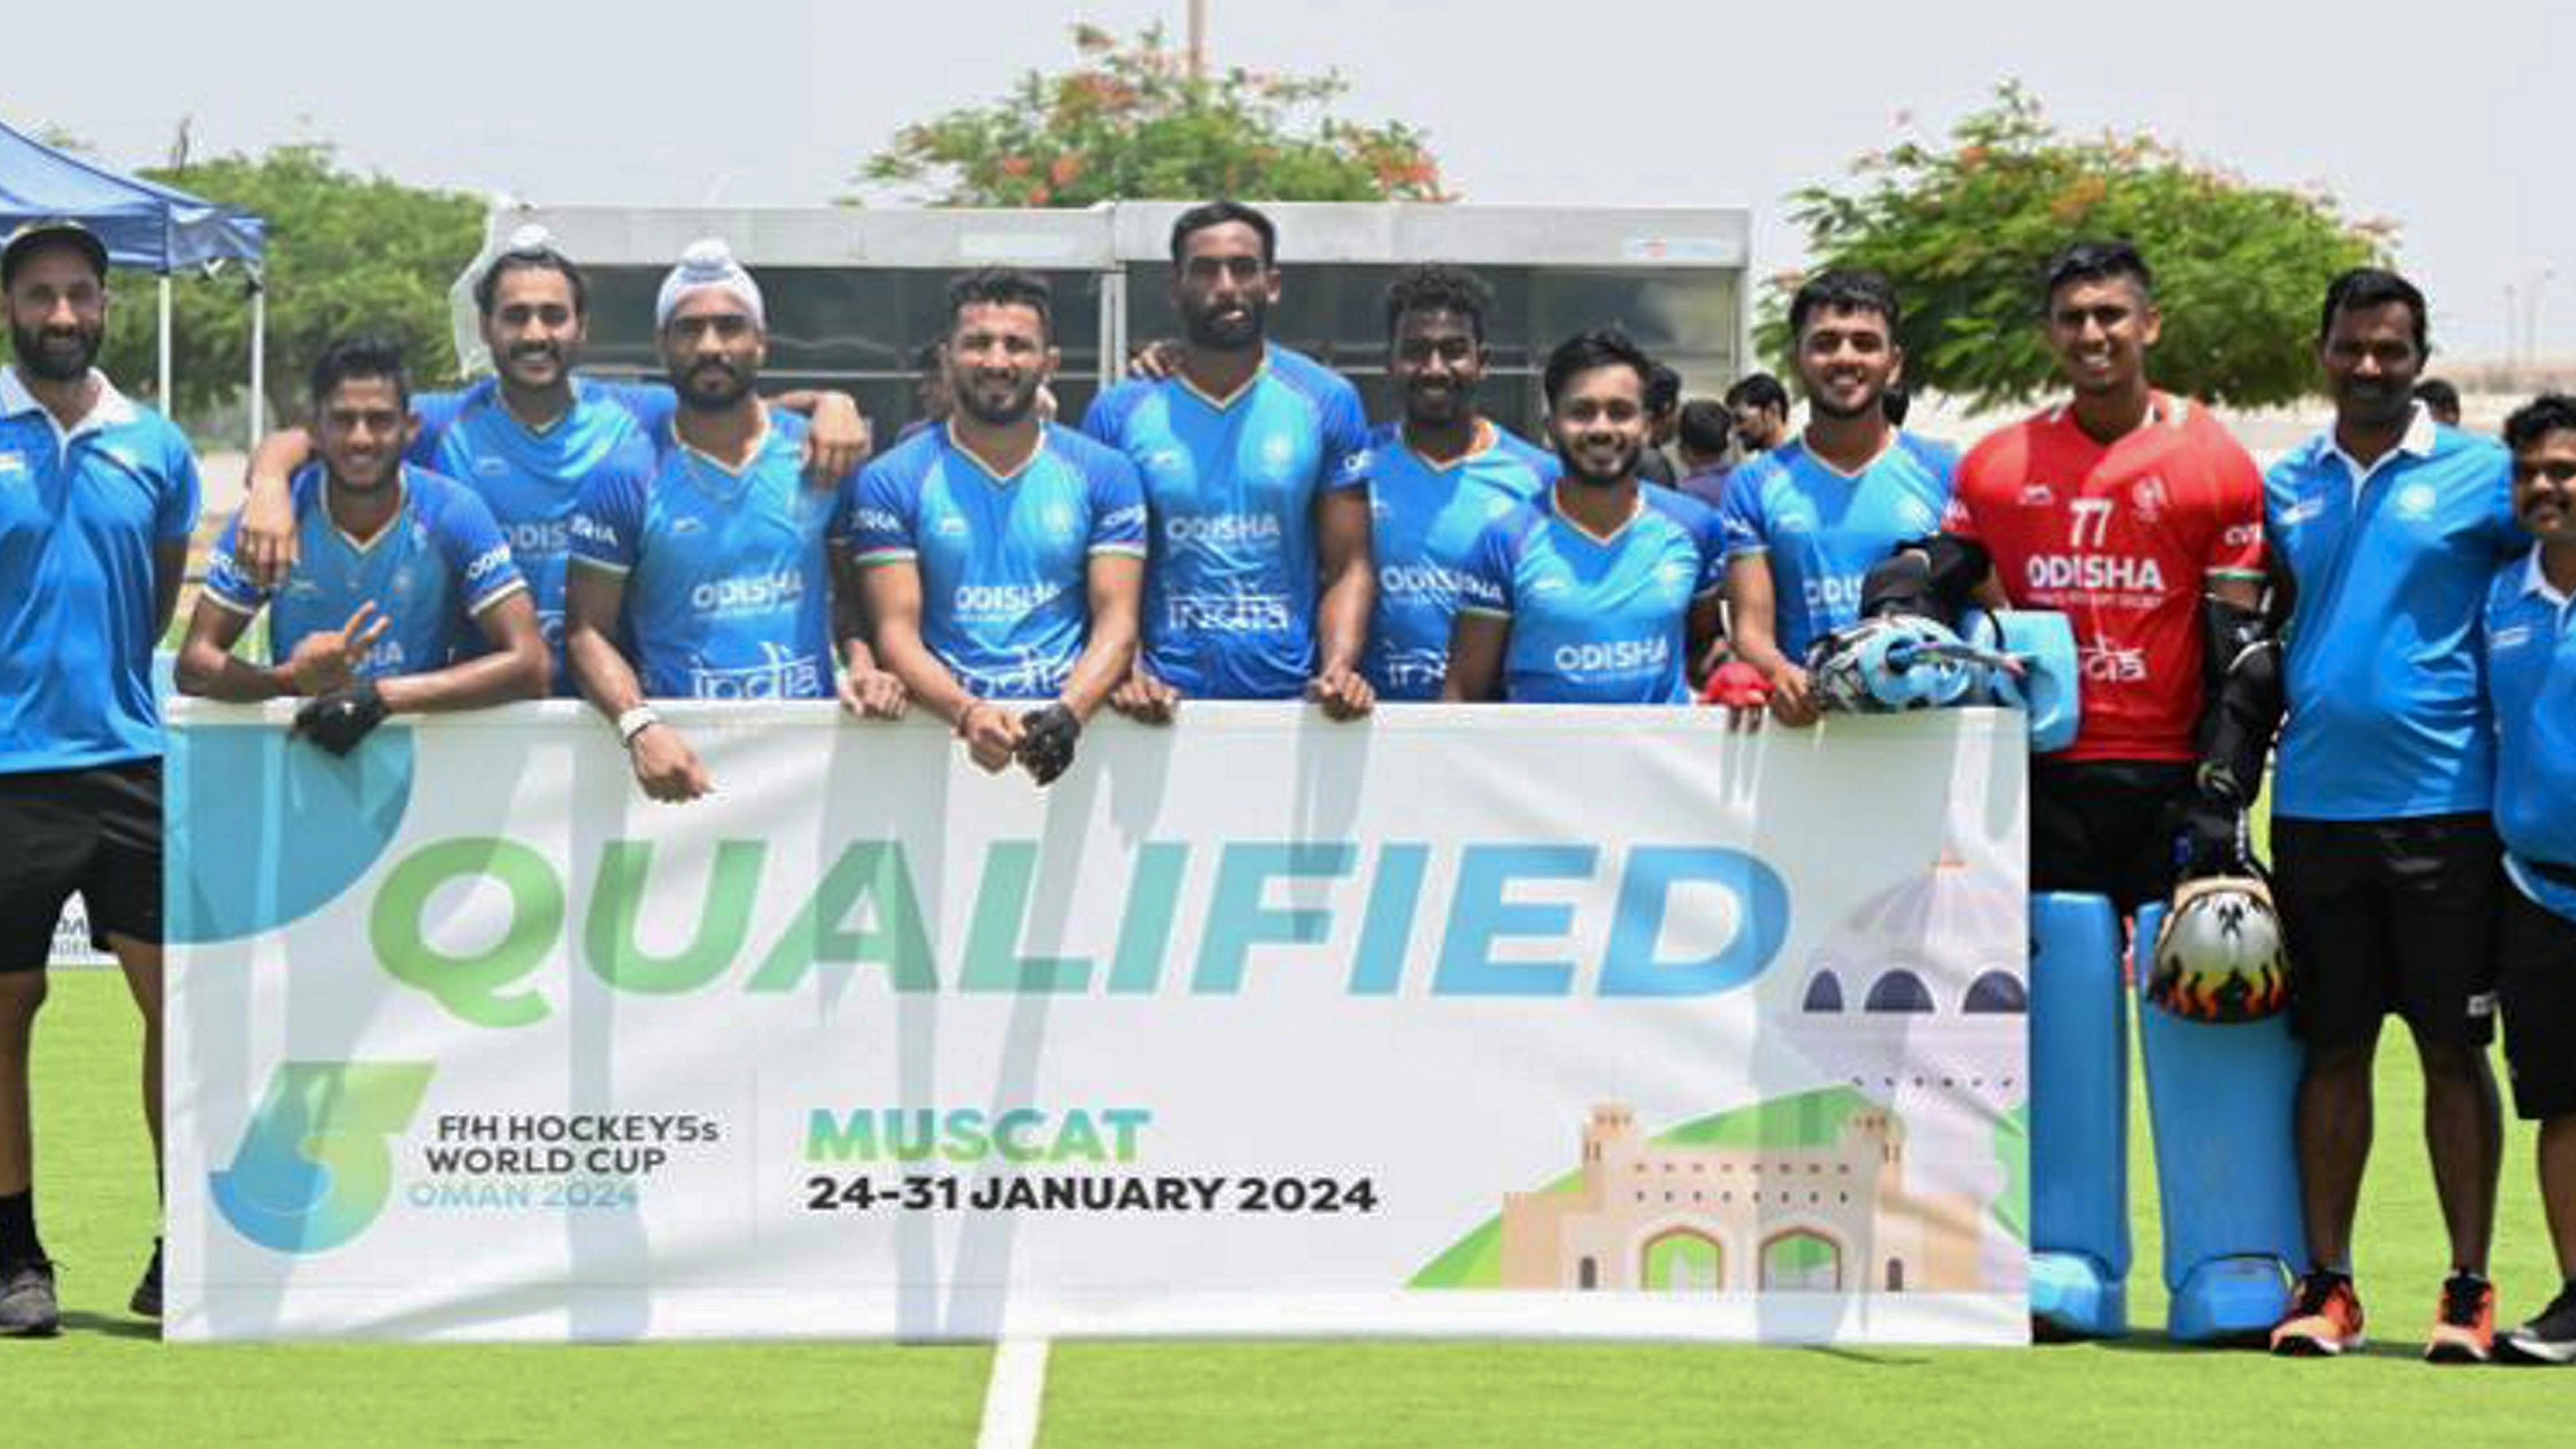 <div class="paragraphs"><p>Indian team poses for photos after winning the Men's Hockey5s Asia Cup and qualifying for the FIH Men's Hockey5s World Cup 2024, in Salalah, Oman, Saturday, Sept. 2, 2023. India beat Pakistan 2-0 in the shootout after both teams were locked at 4-4 in regulation time. </p></div>